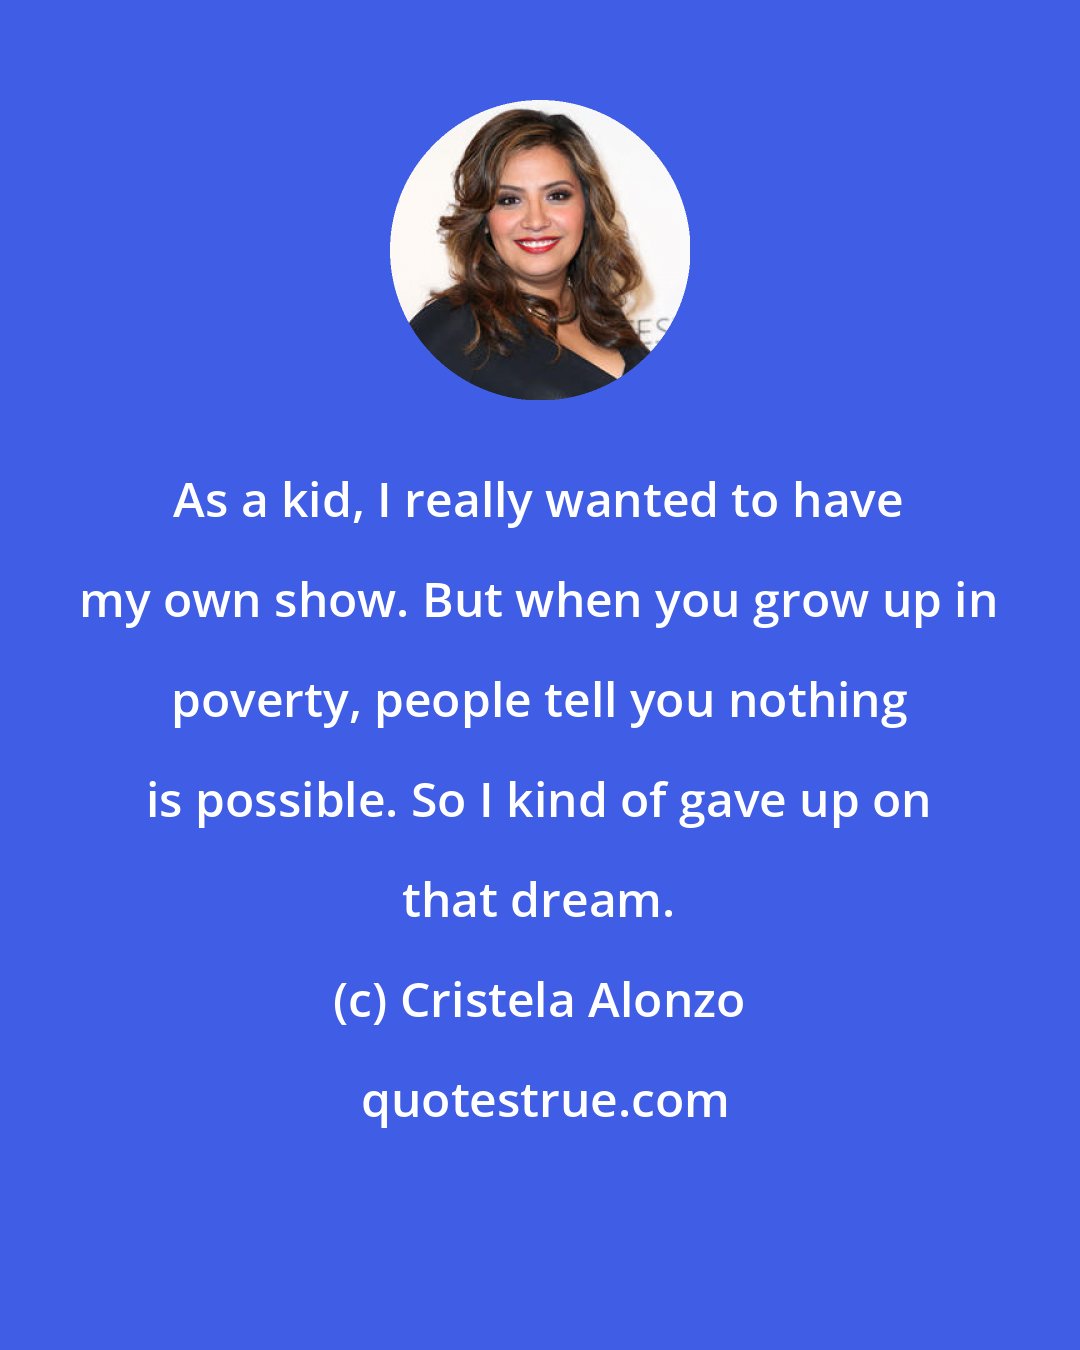 Cristela Alonzo: As a kid, I really wanted to have my own show. But when you grow up in poverty, people tell you nothing is possible. So I kind of gave up on that dream.